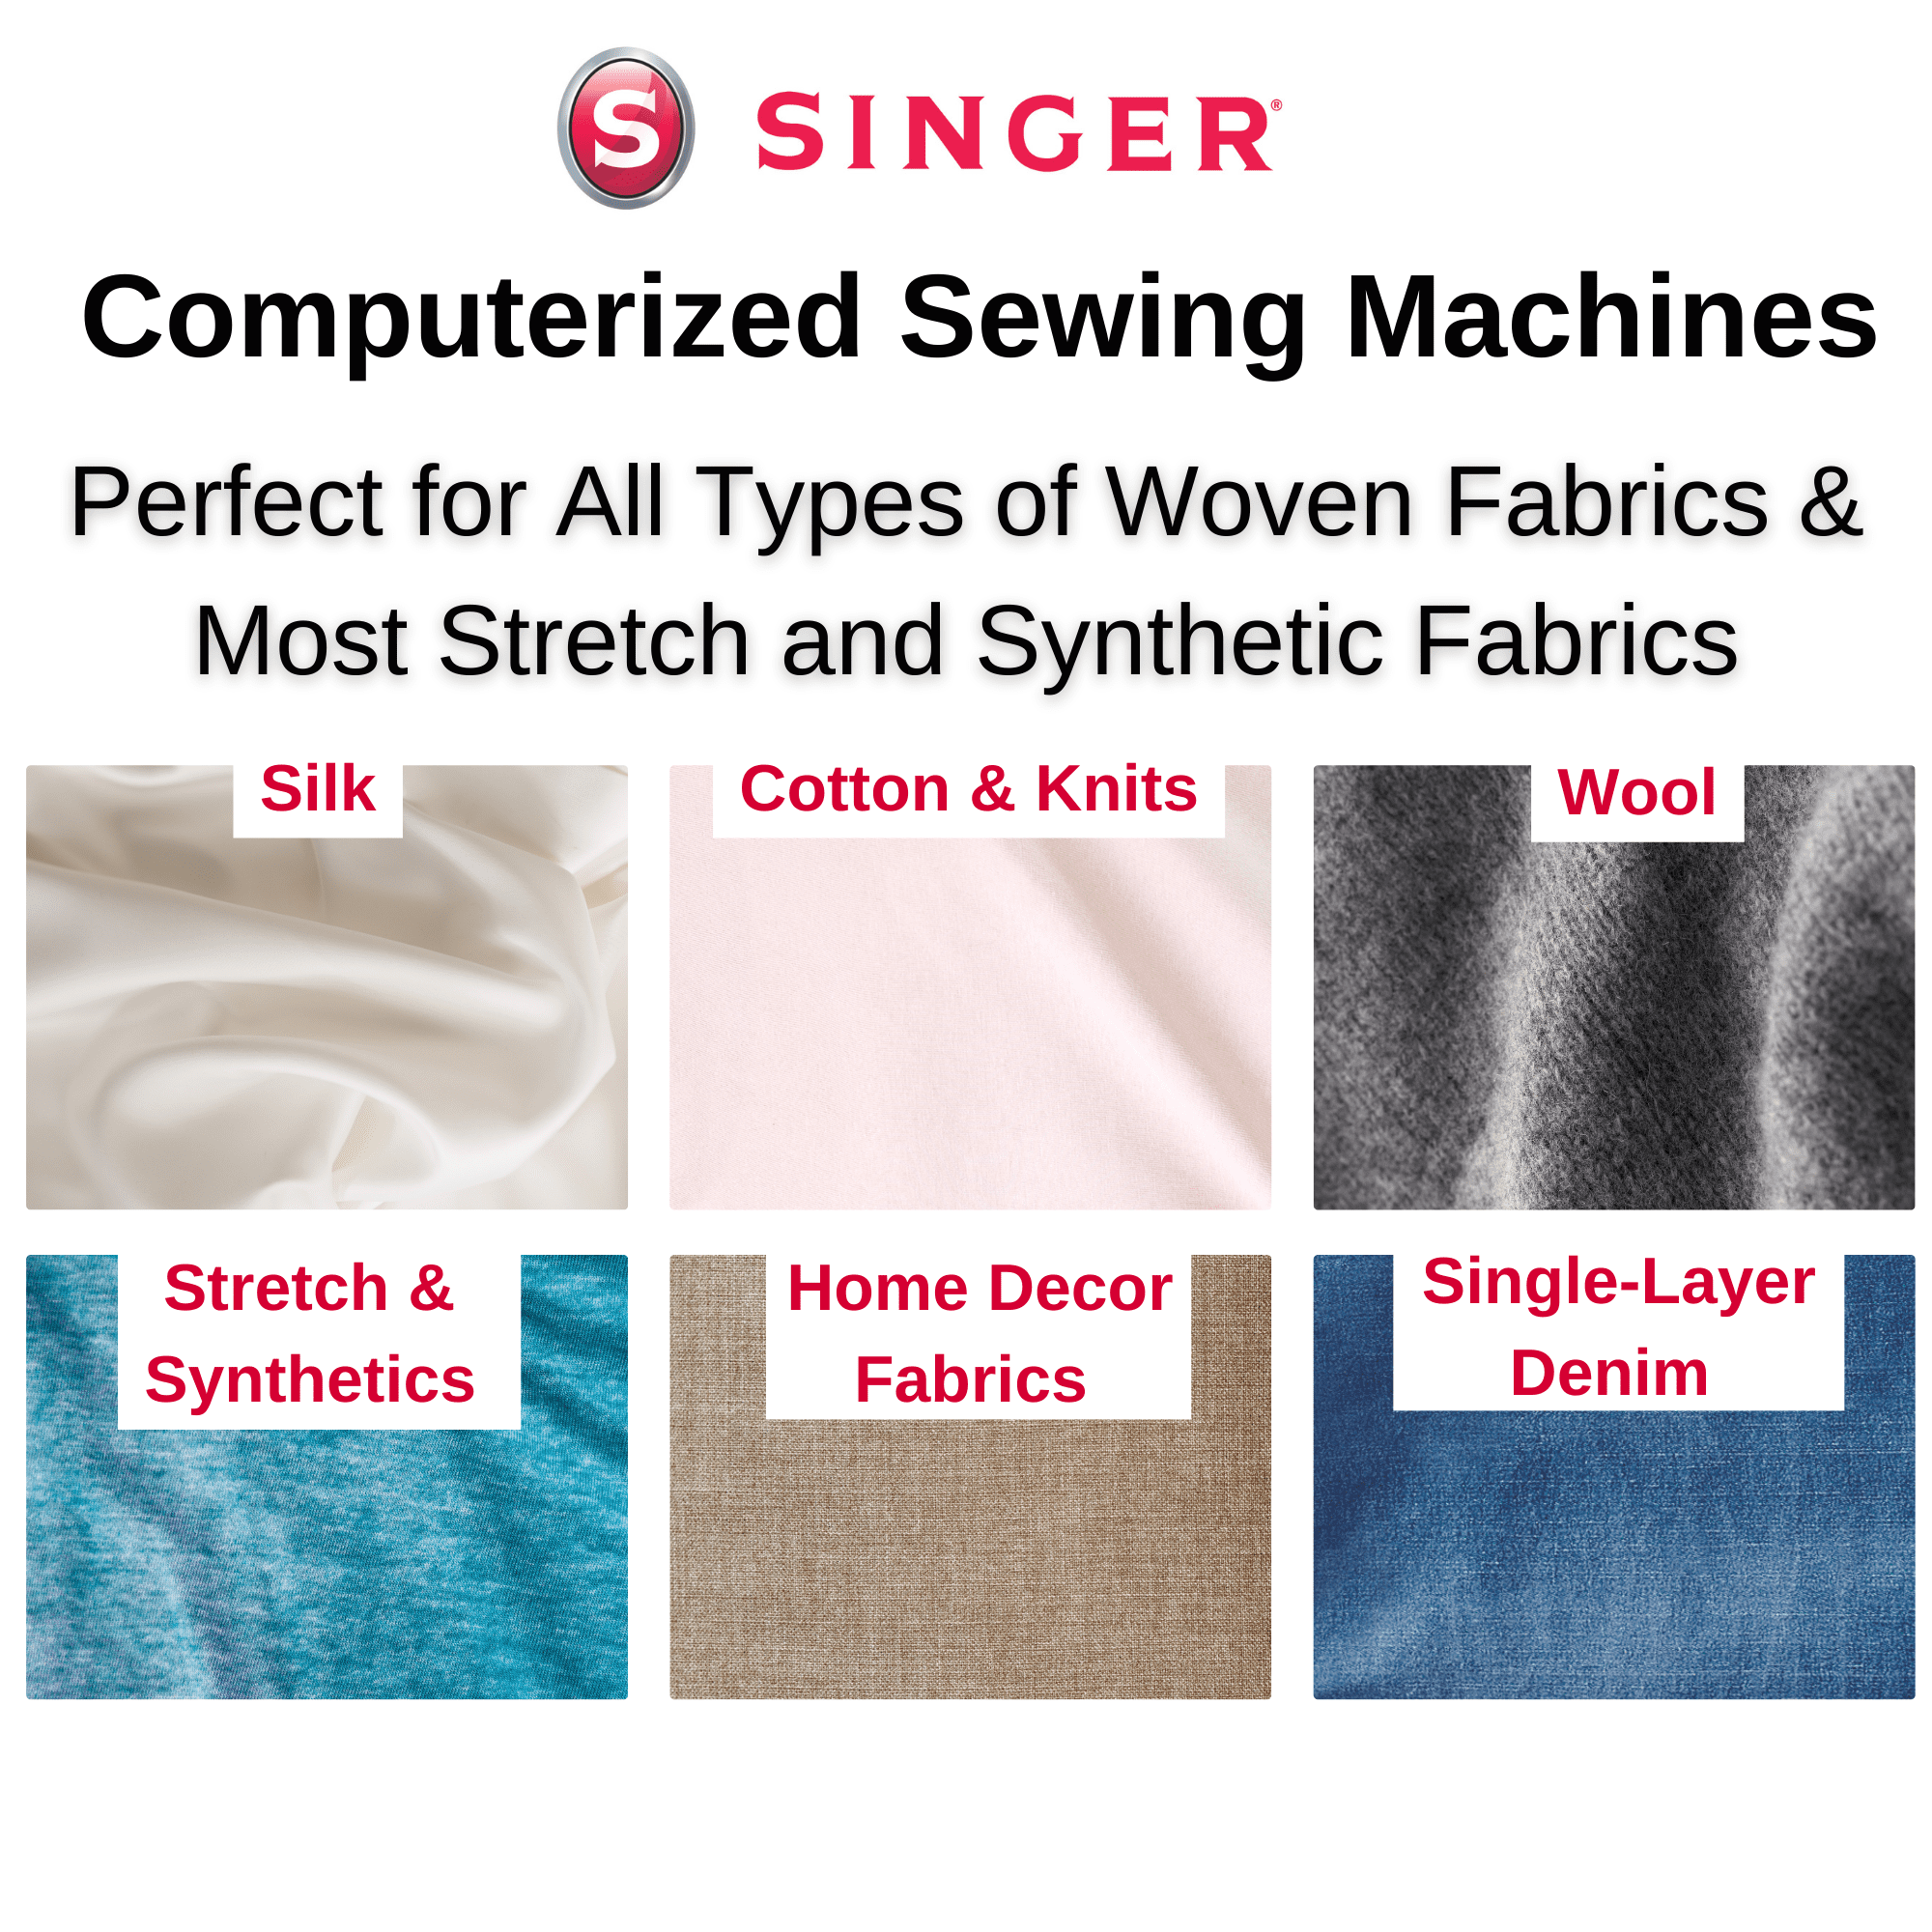 Singer C430 Professional Machine Computerized Capability Screen, Sewing LCD Memory Stitches 810 and